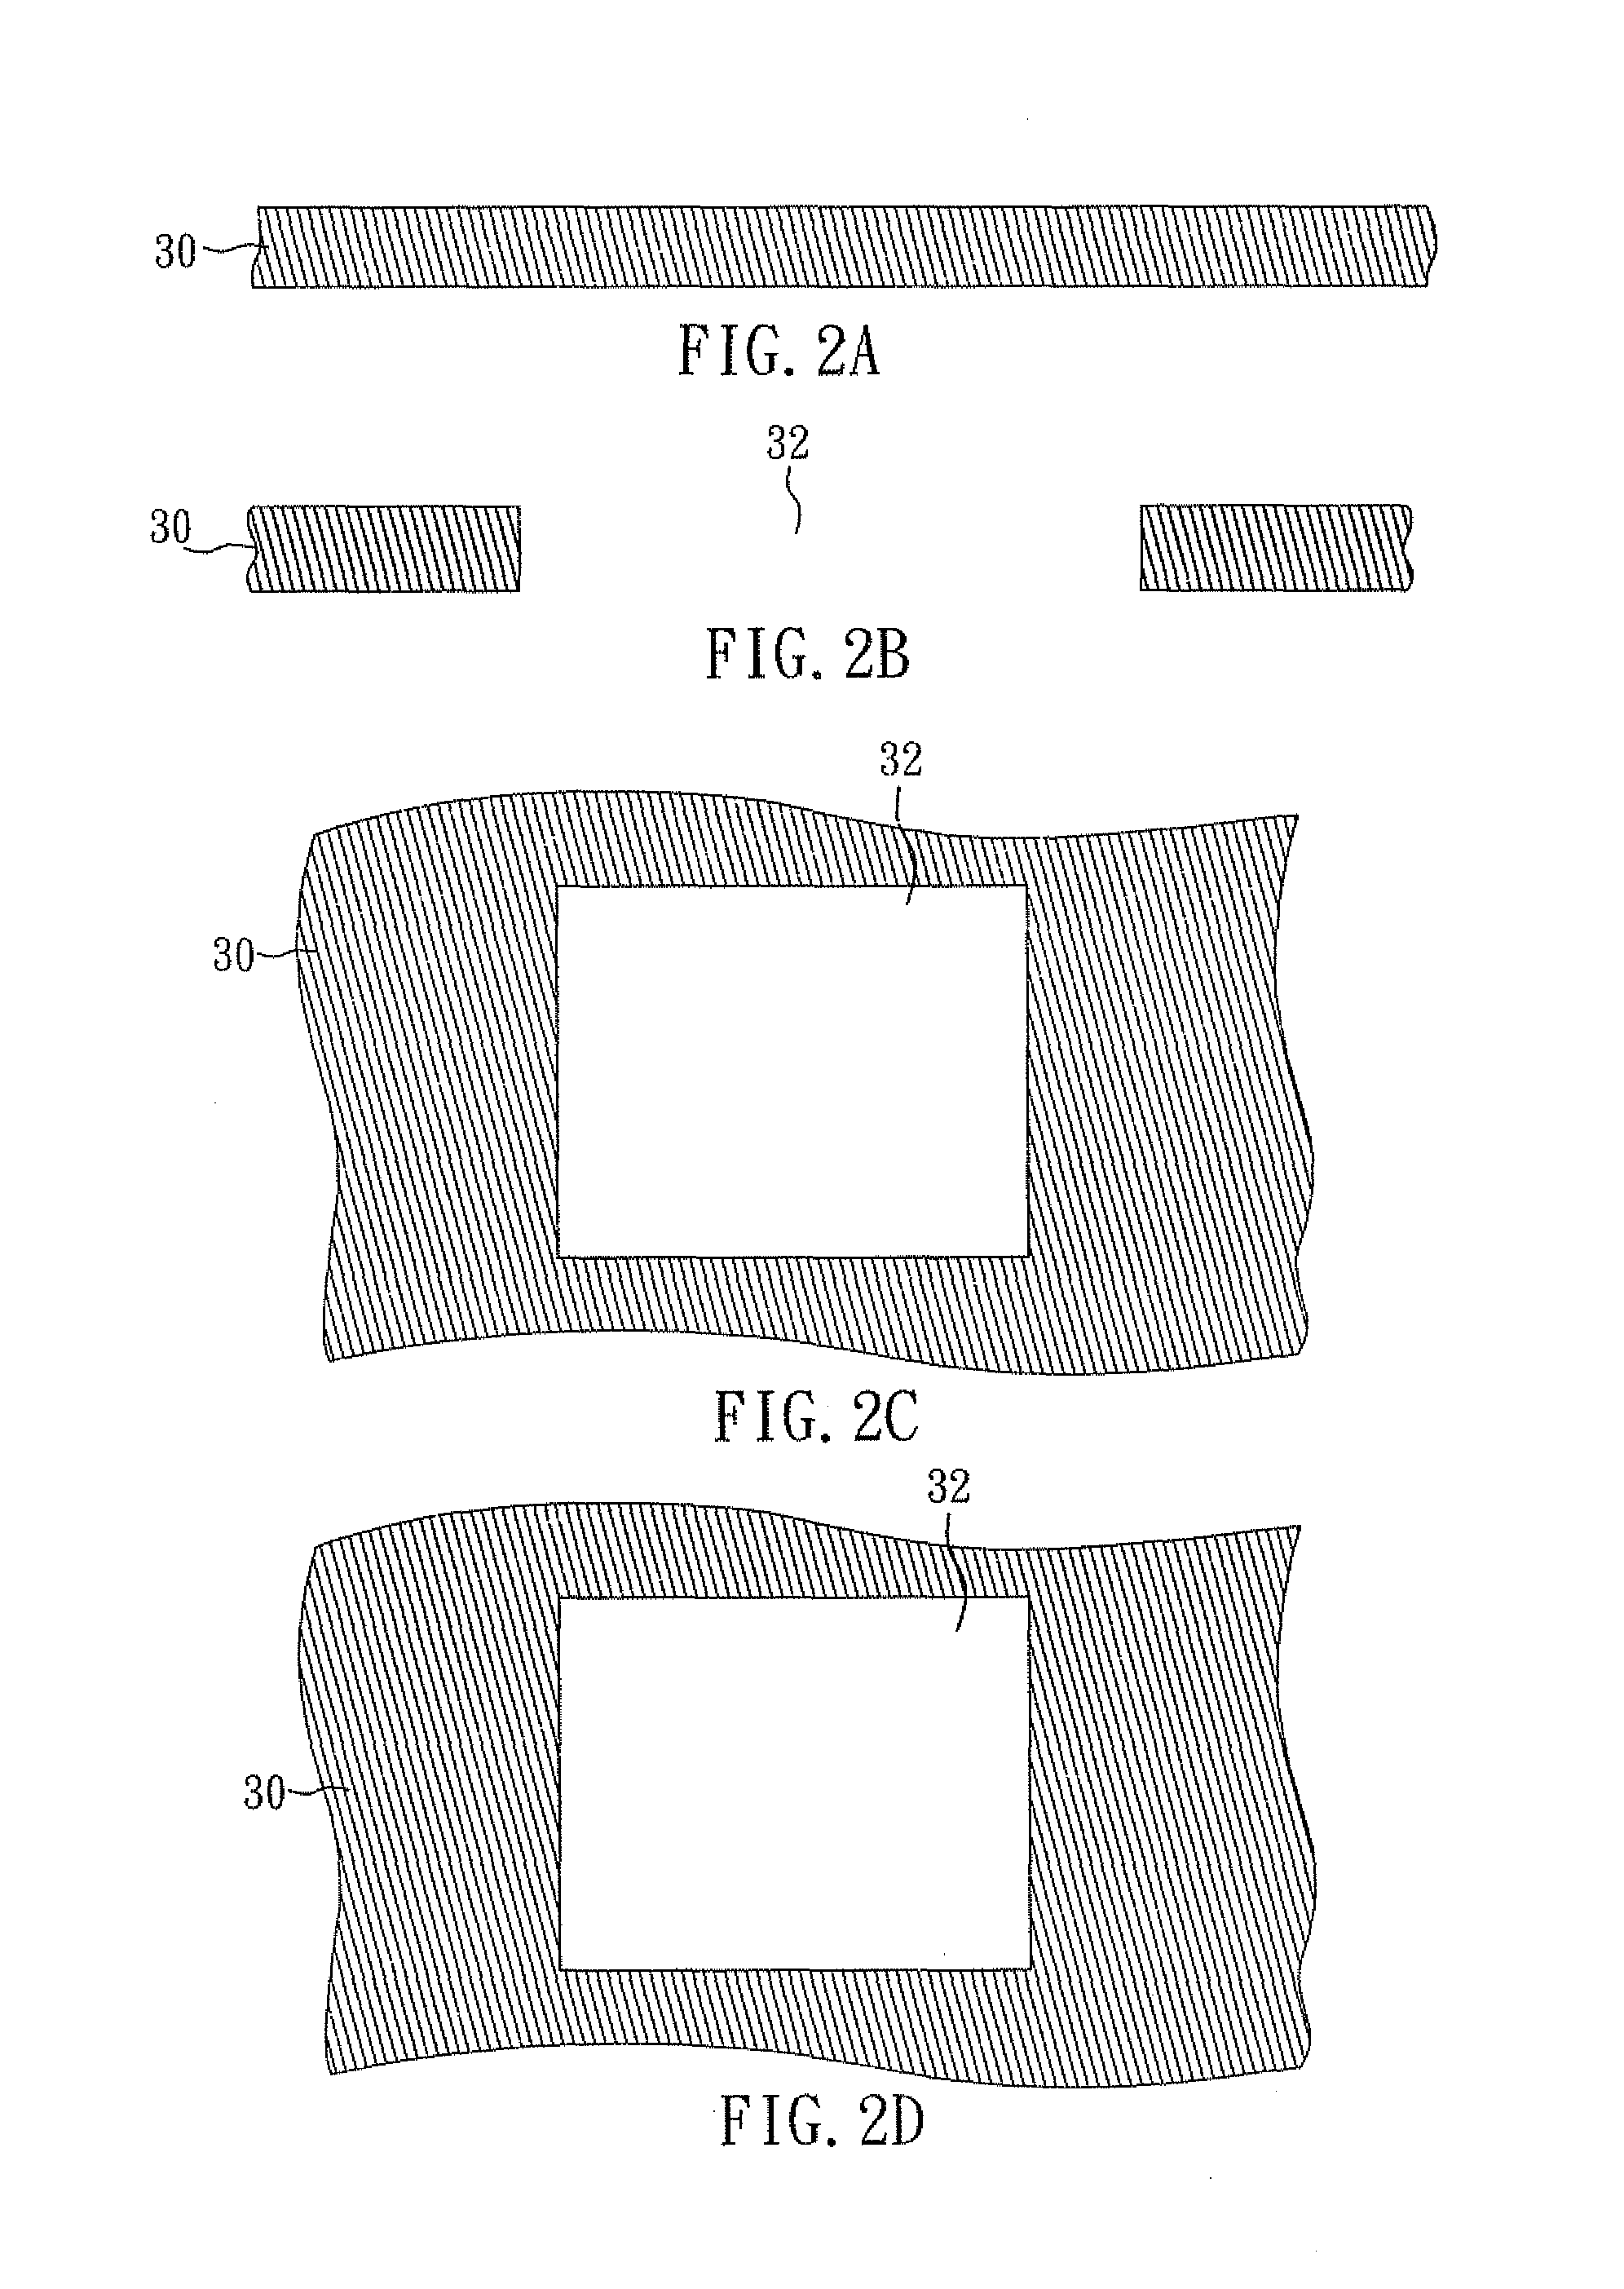 Stackable semiconductor assembly with bump/flange heat spreader and dual build-up circuitry